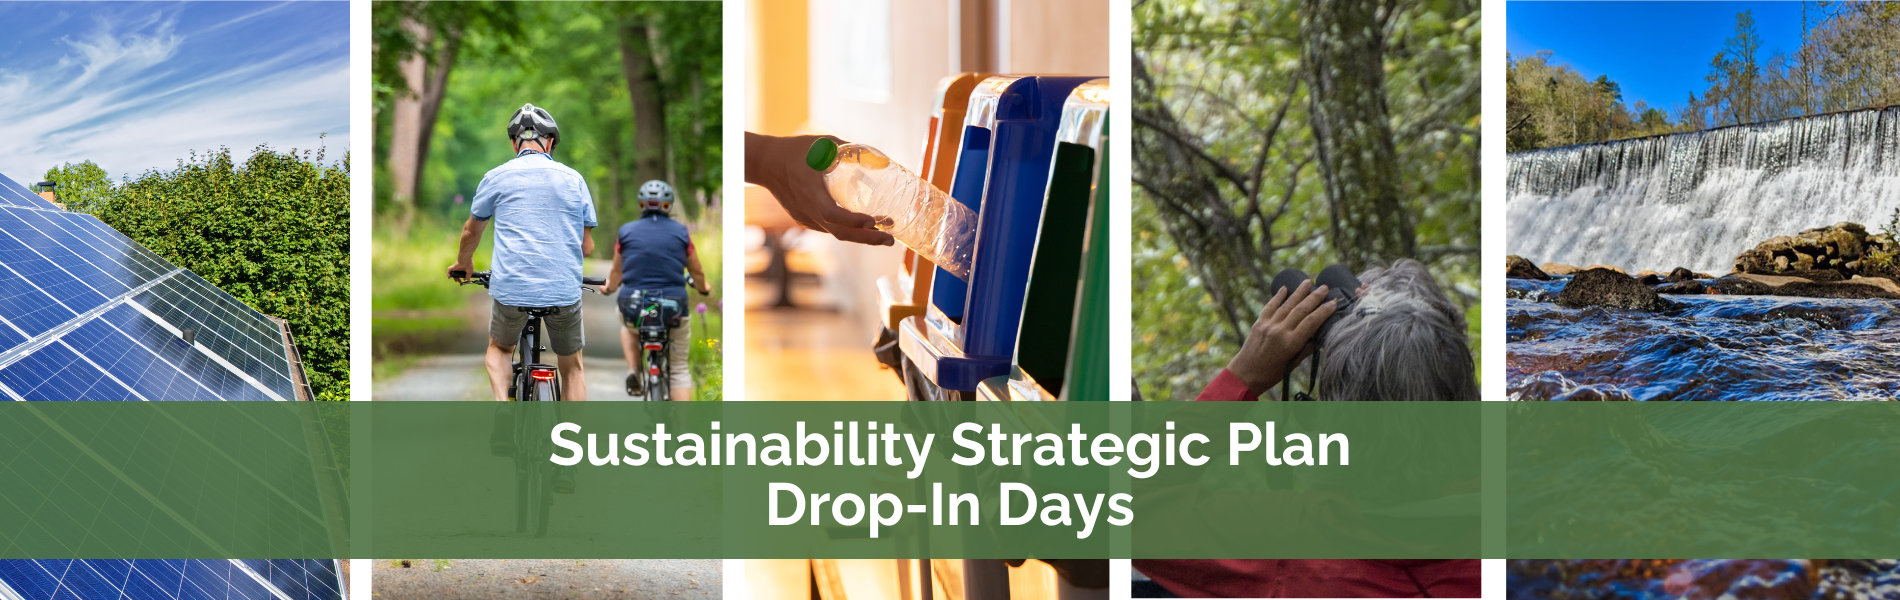 Sustainability Strategic Plan Drop-In Days Graphic